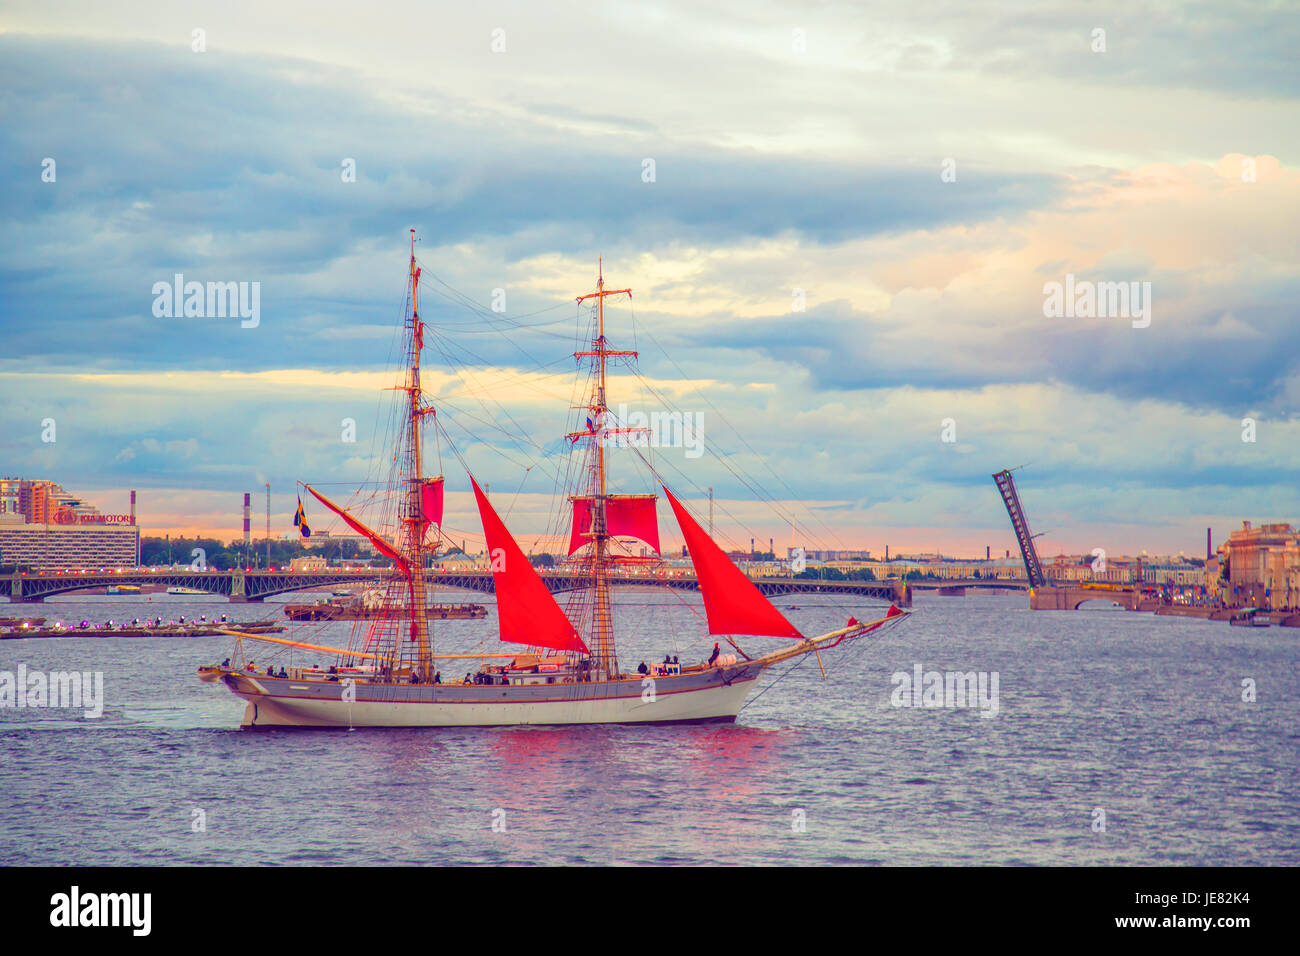 St Petersburg, Russia. 22nd June, 2017. Brig with scarlet sails on the river Neva. Rehearsal of holiday for school graduates "Scarlet Sails". ST PETERSBURG, RUSSIA - JUNE 22, 2017. Credit: Elizaveta Larionova/Alamy Live News Stock Photo